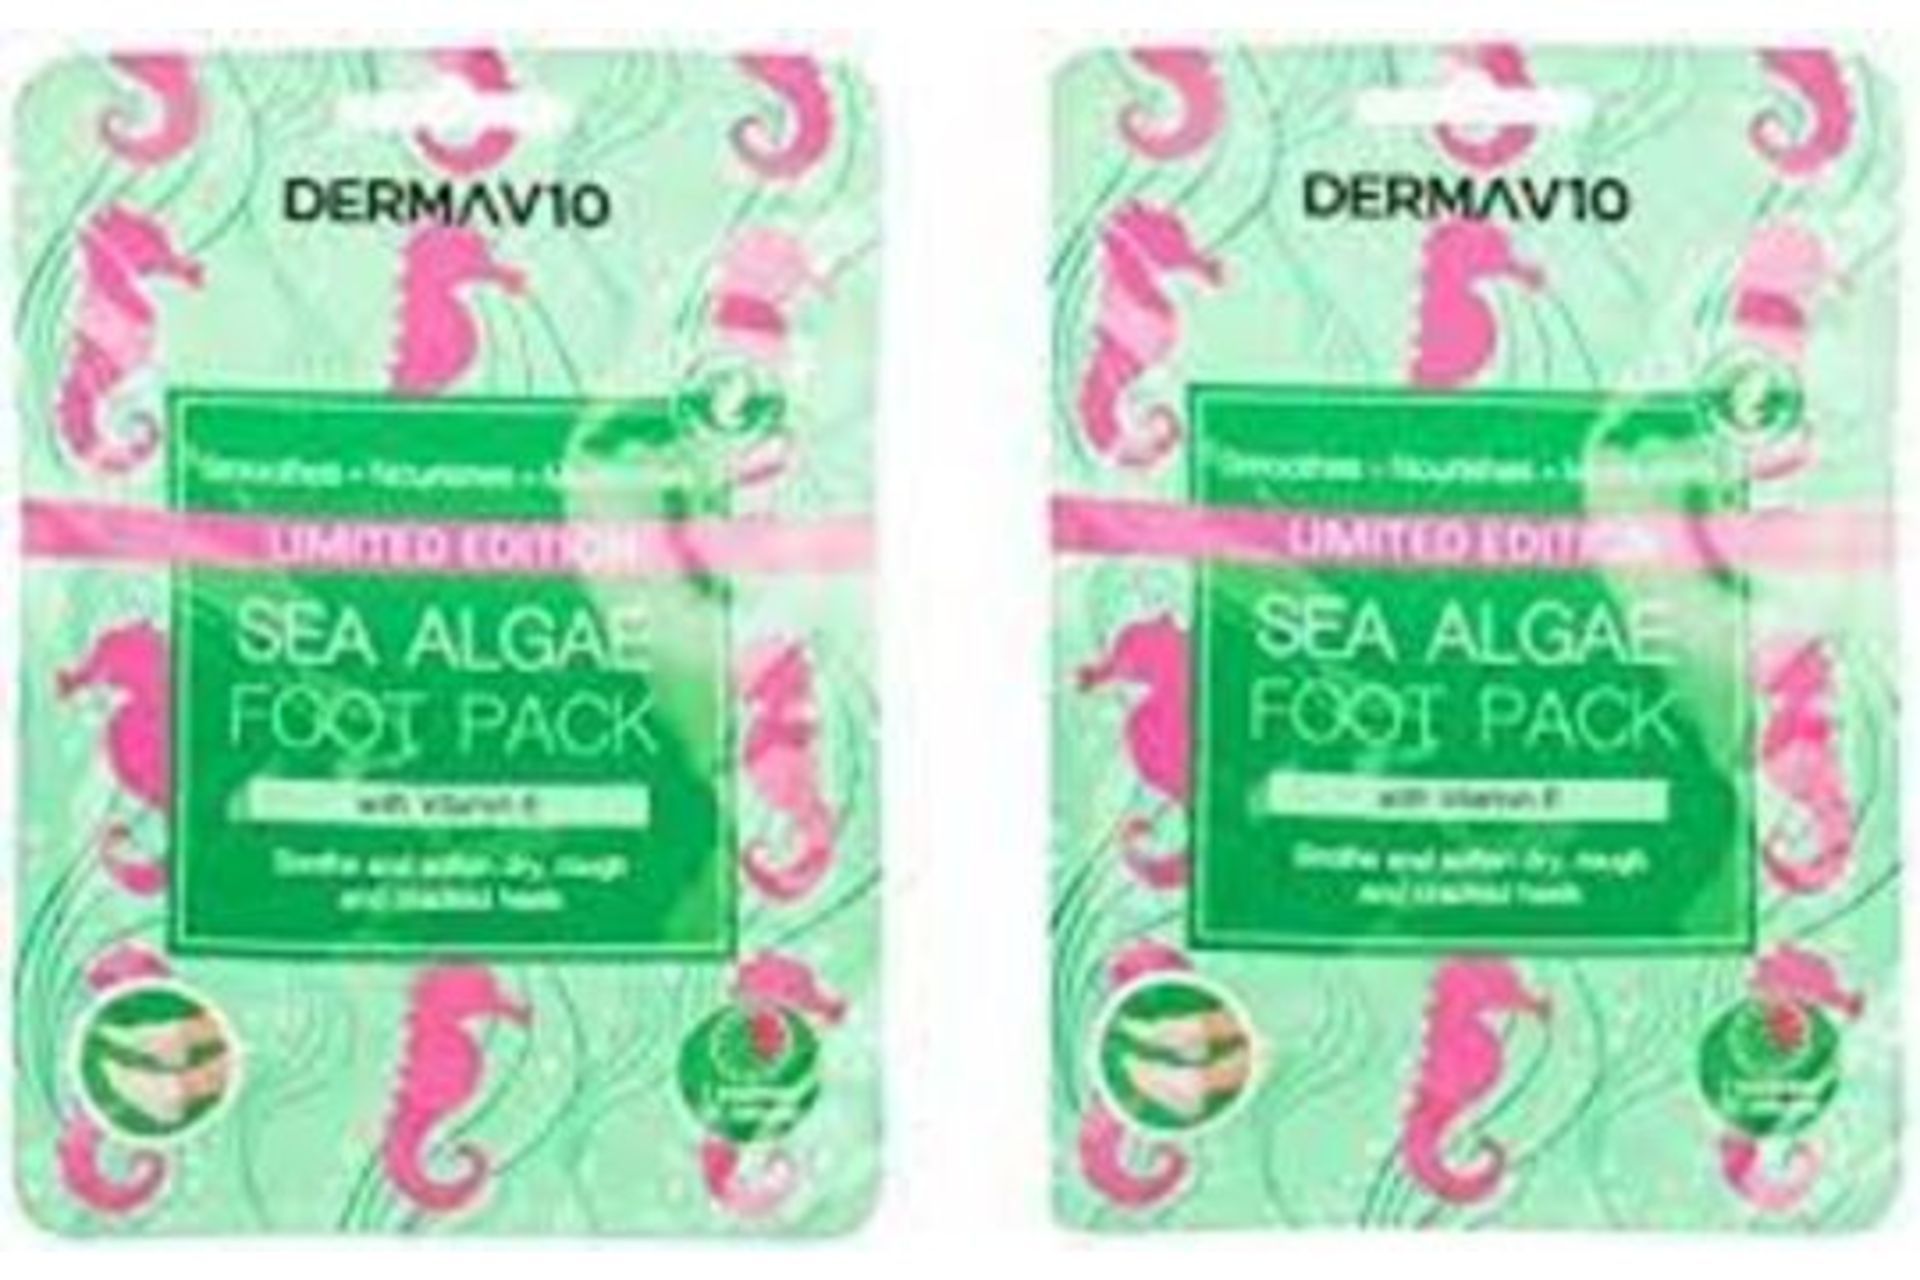 240 X NEW PACKAGED DERMAV10 LIMITED EDITION SEA ALGAE FOOT PACK. WITH VITAMIN E. SOOTHE AND SOFTEN